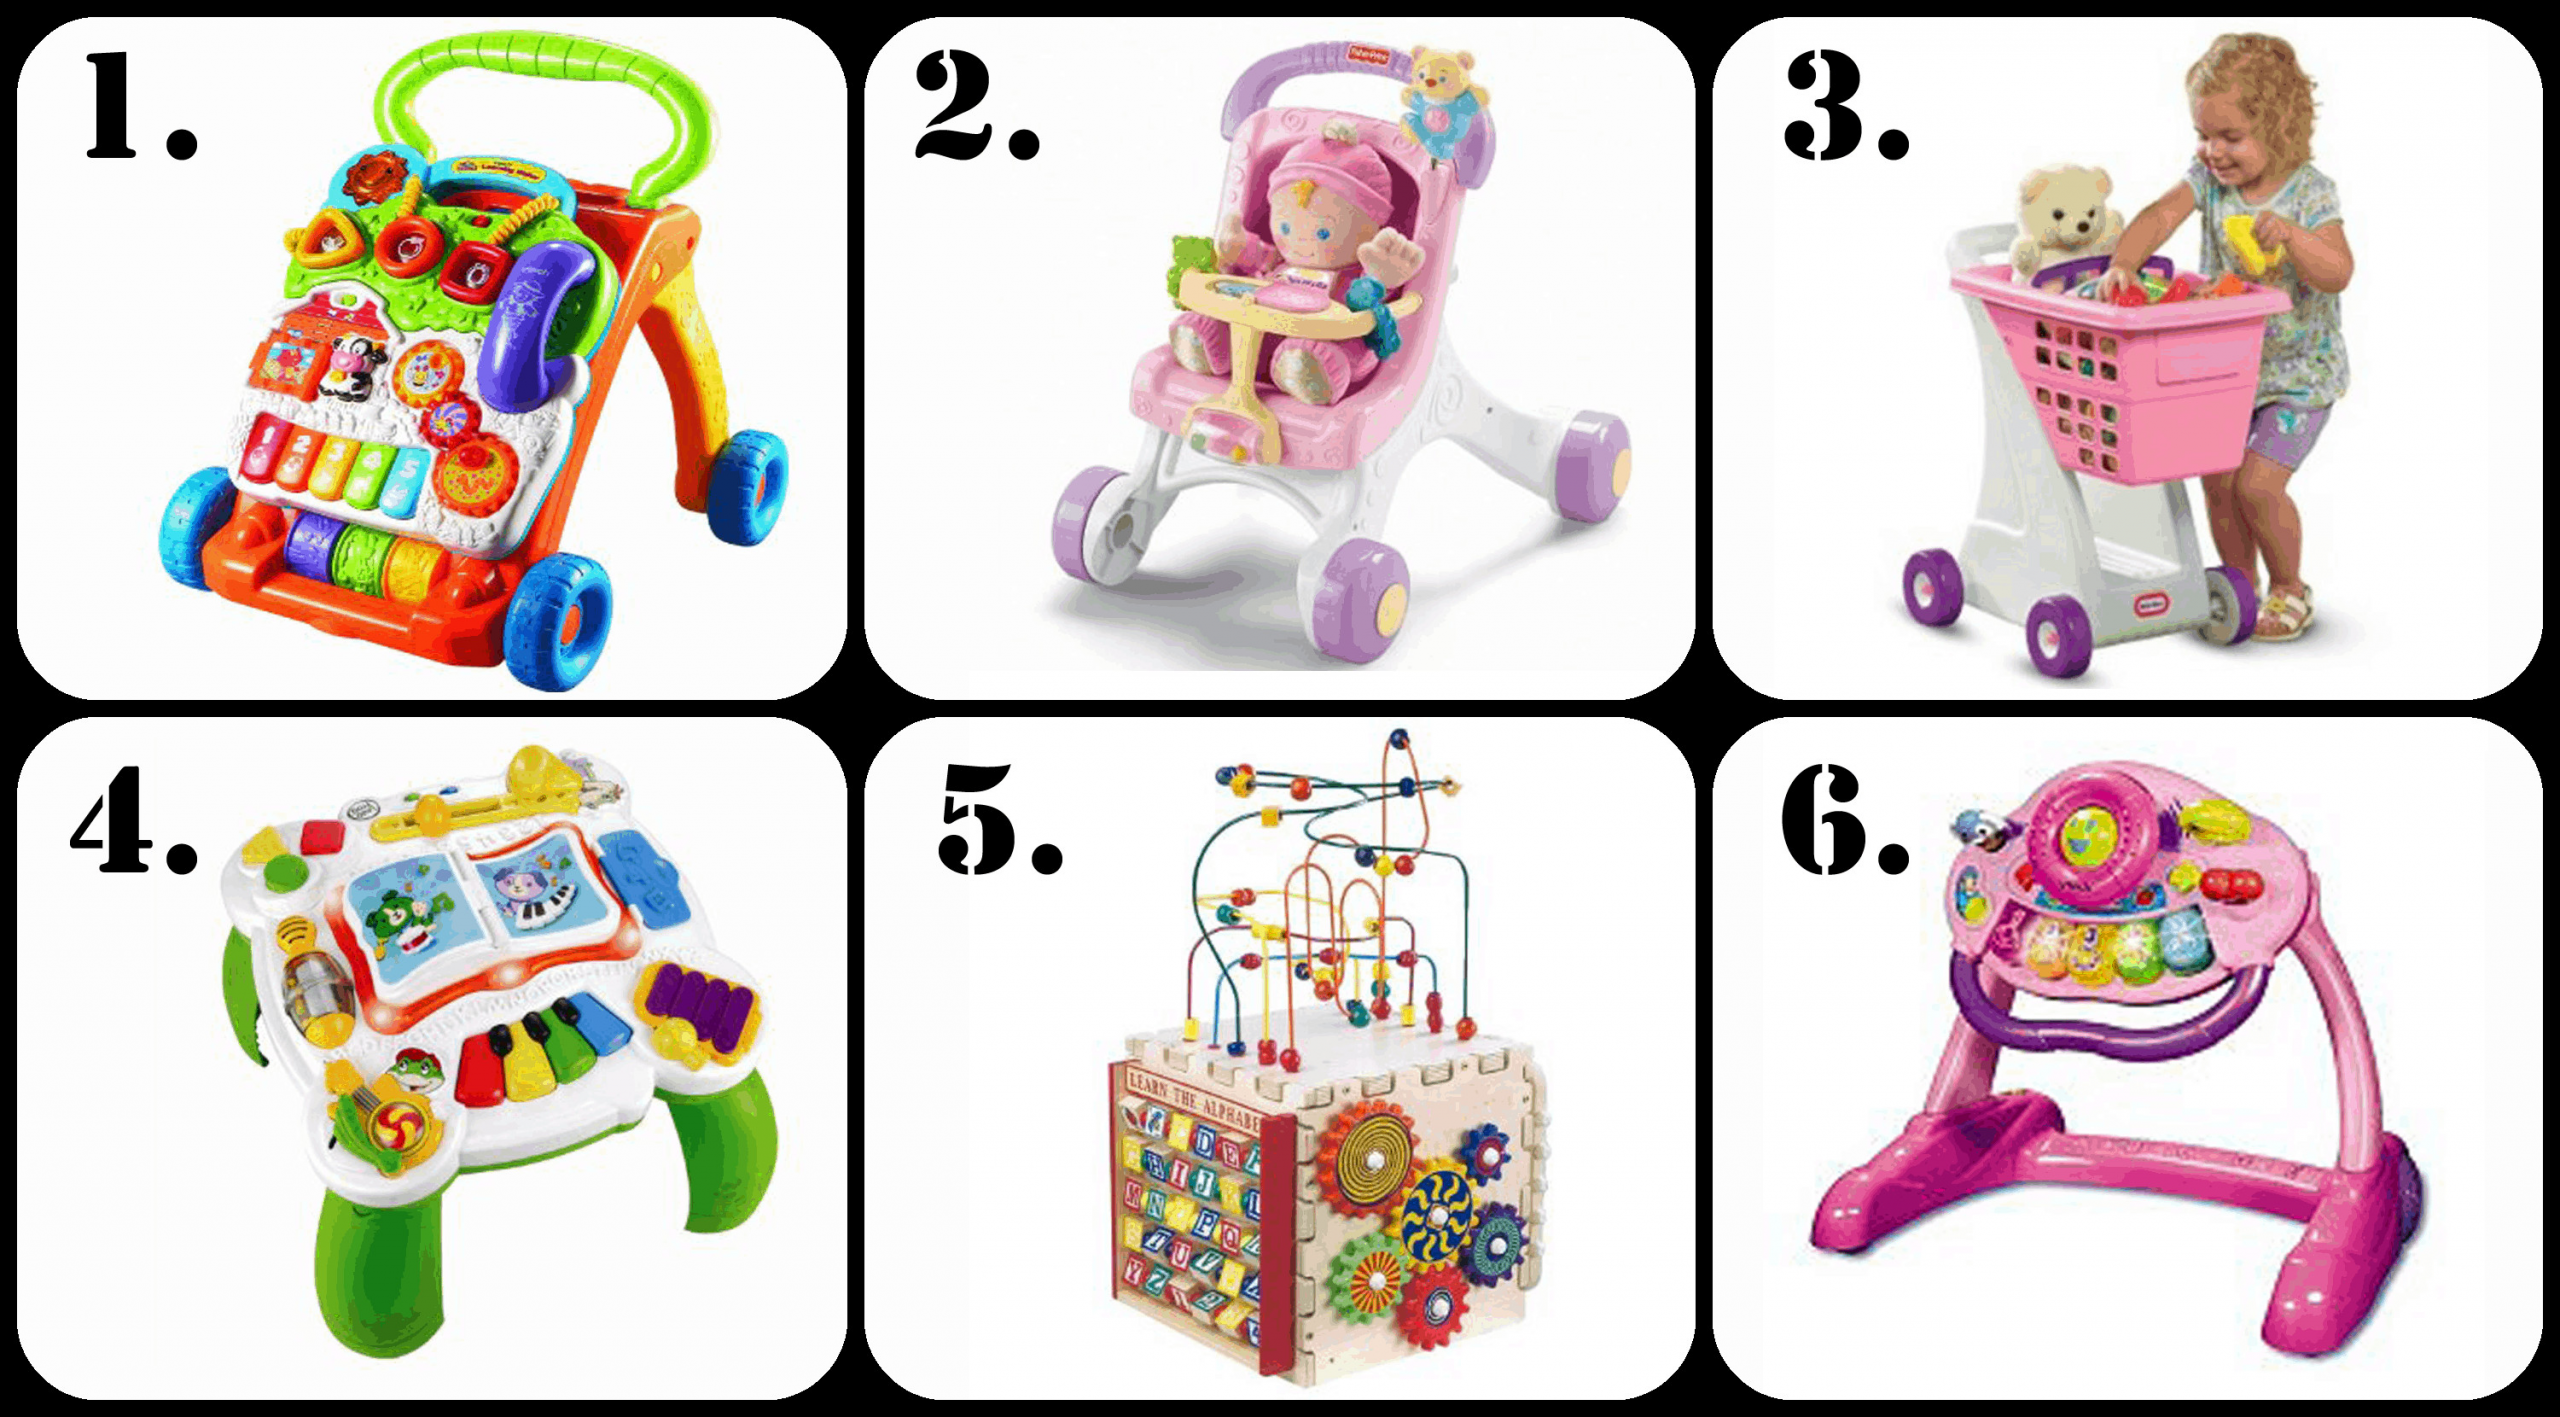 Gift Ideas For One Year Old Girls
 The Ultimate List of Gift Ideas for a 1 Year Old Girl